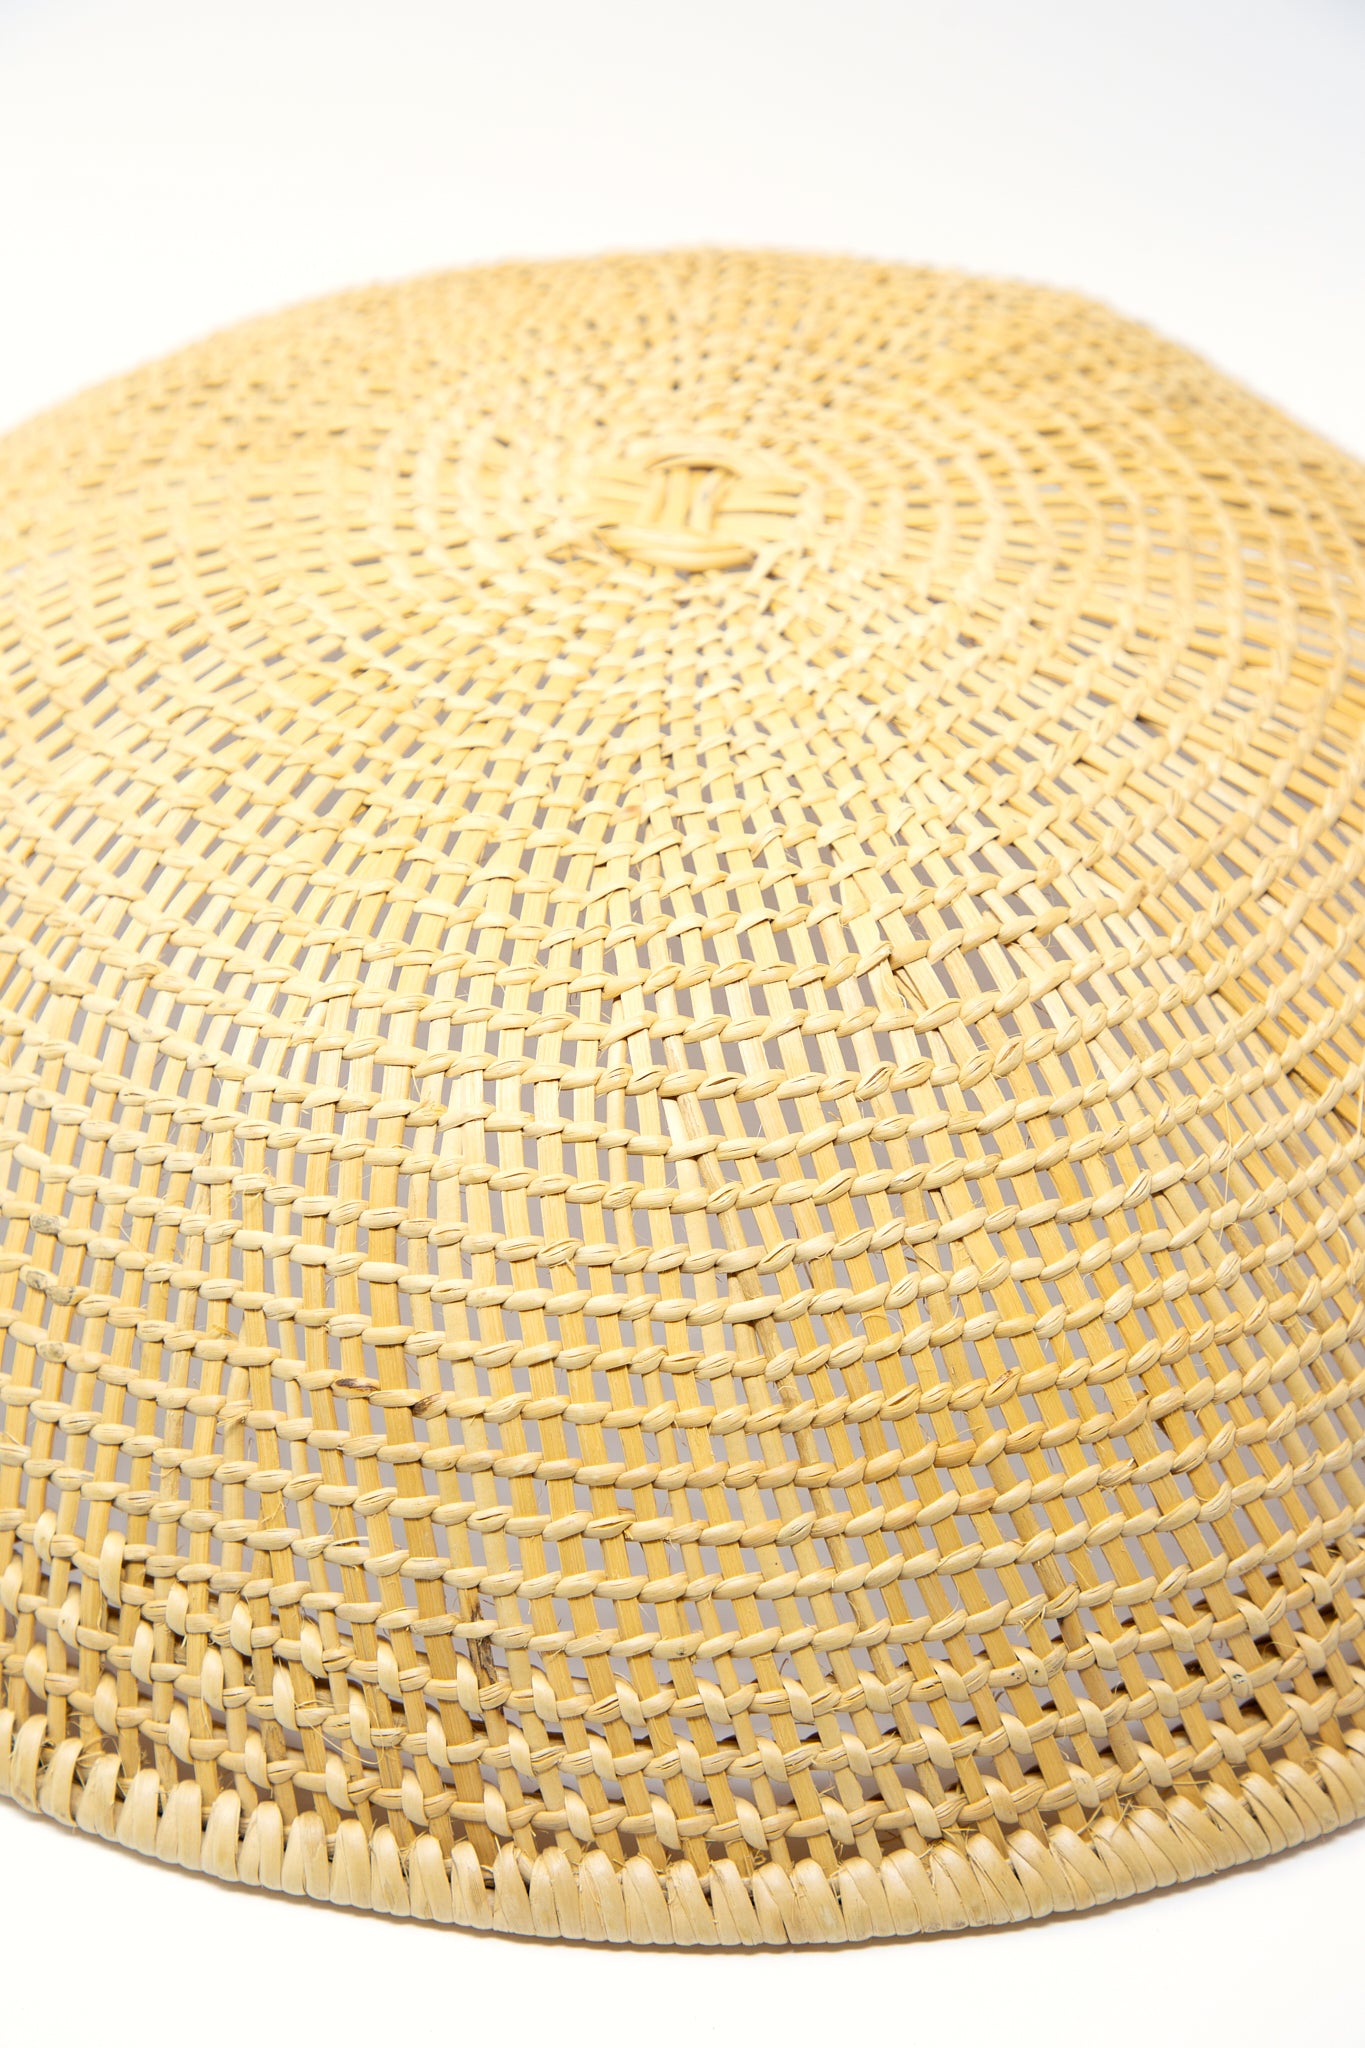 A Plaza Bolivar XL Avia Pova Basket, handmade with traditional basket weaving techniques by an artisan, placed on a white background. Up close to show basket texture.